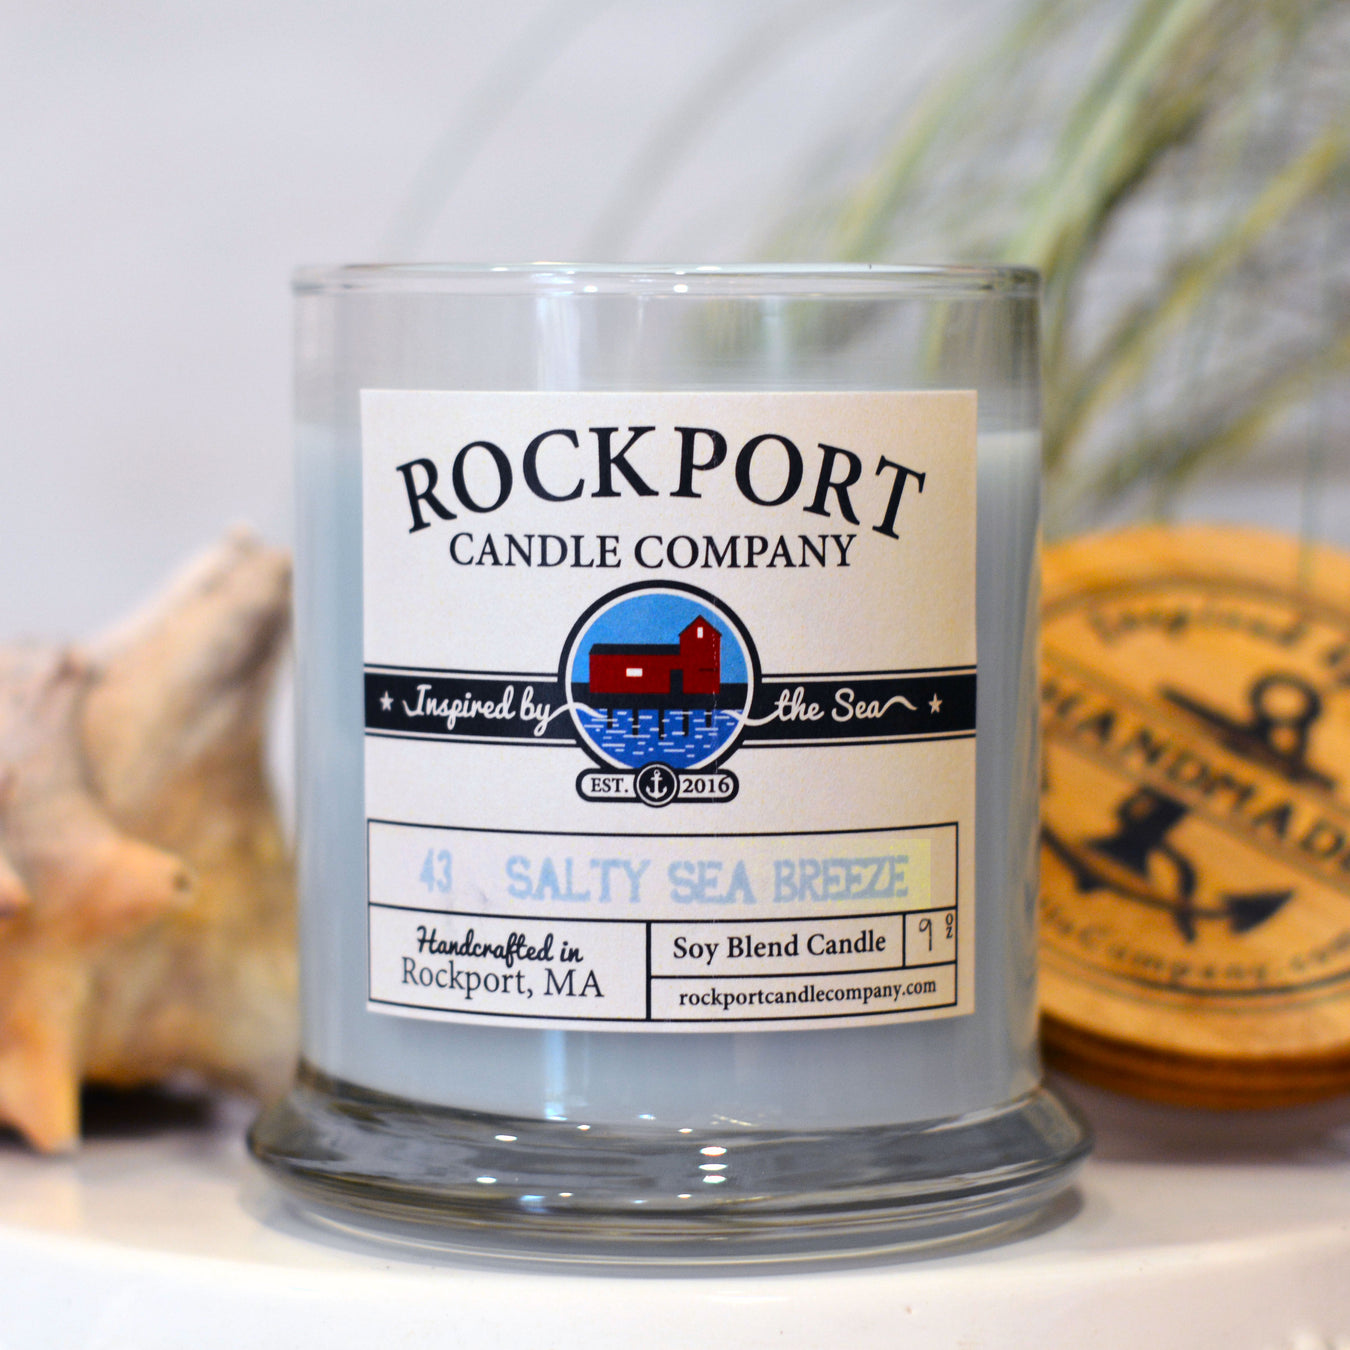 Best Sellers by Rockport Candle Company